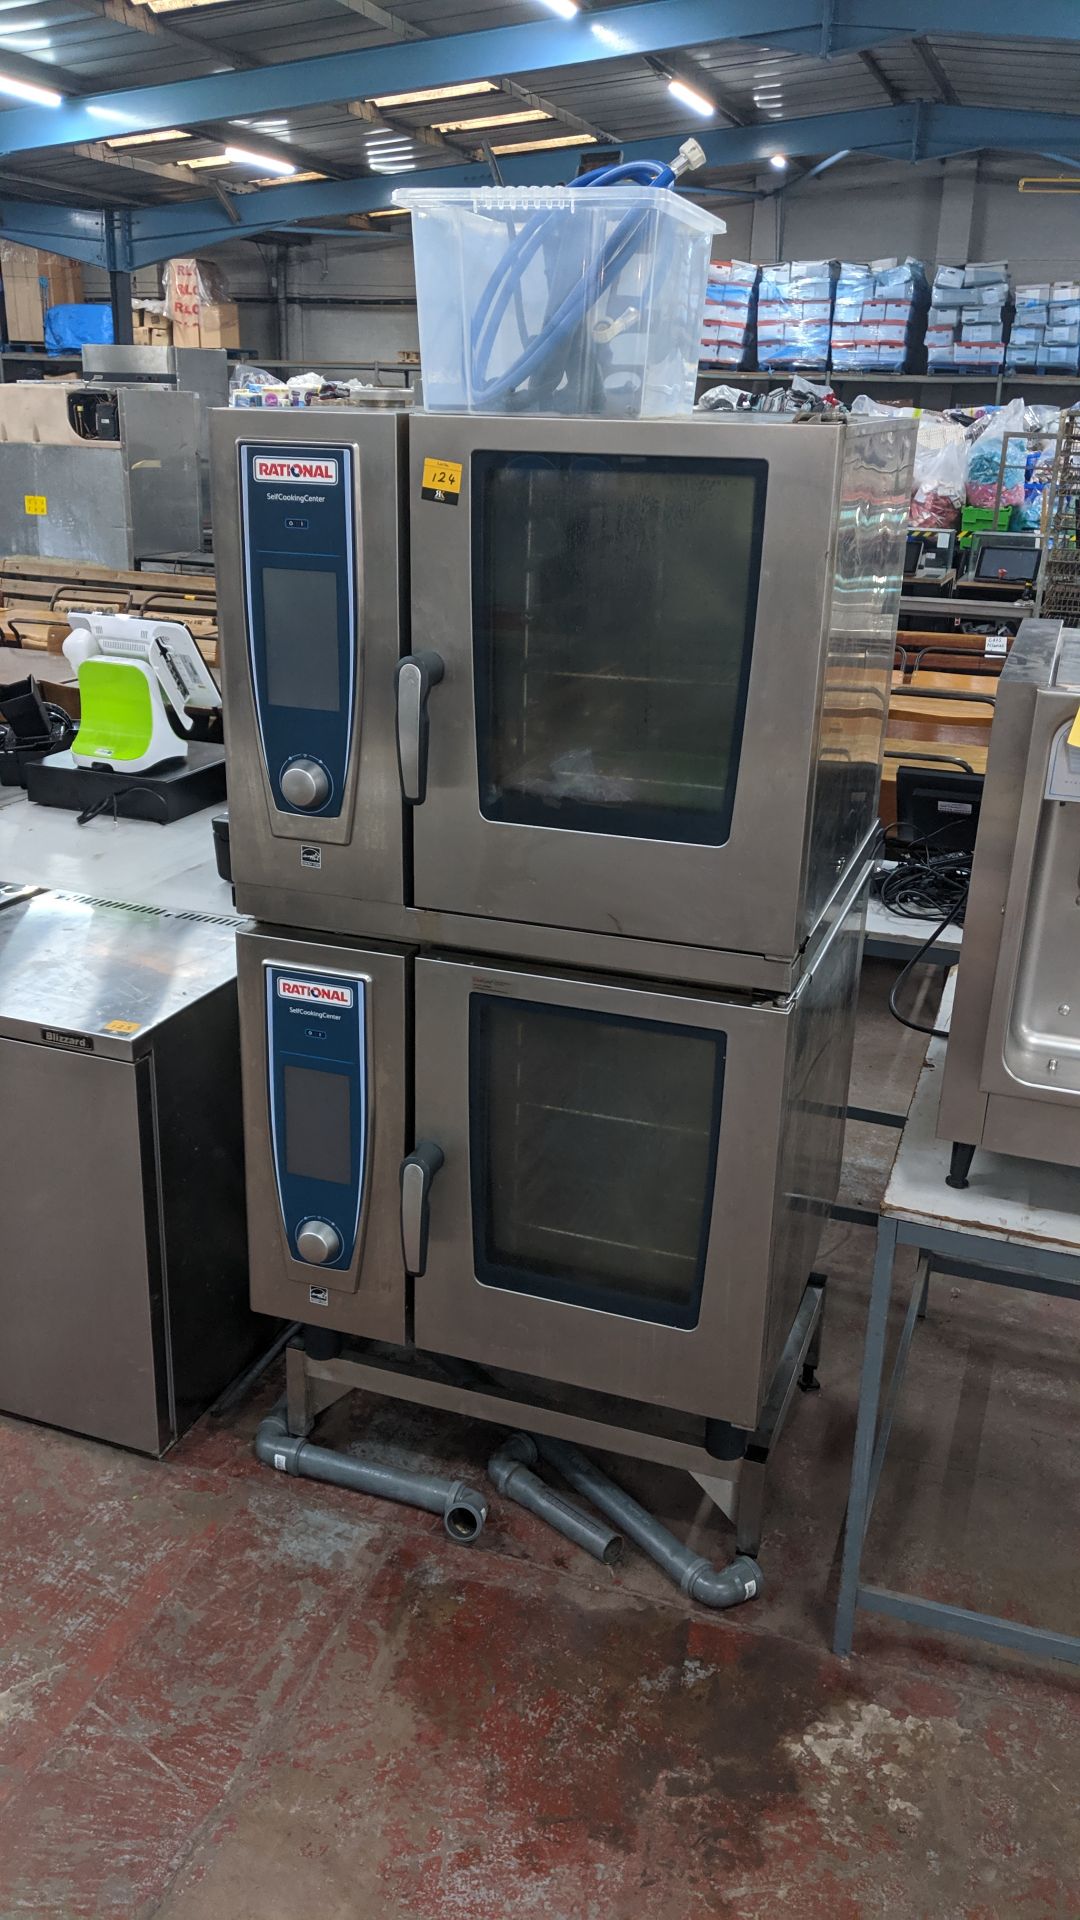 2018 Rational SCCW61E twin combi oven system comprising 2 off ovens plus Rational stacking kit & low - Image 2 of 13